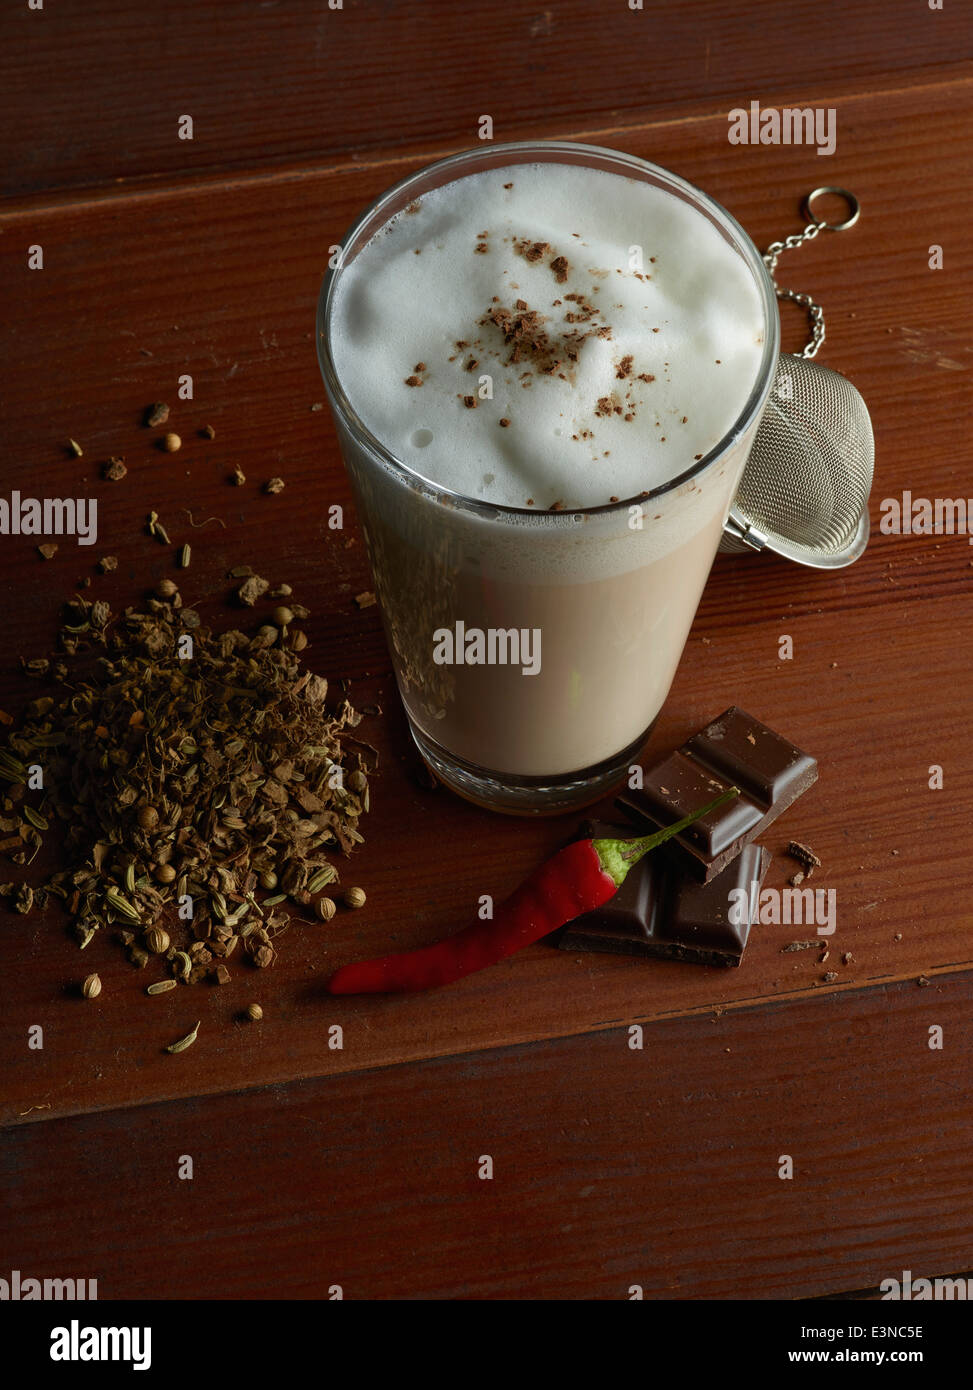 Chai latte surrounded by chocolate, chili, tea and spices Stock Photo